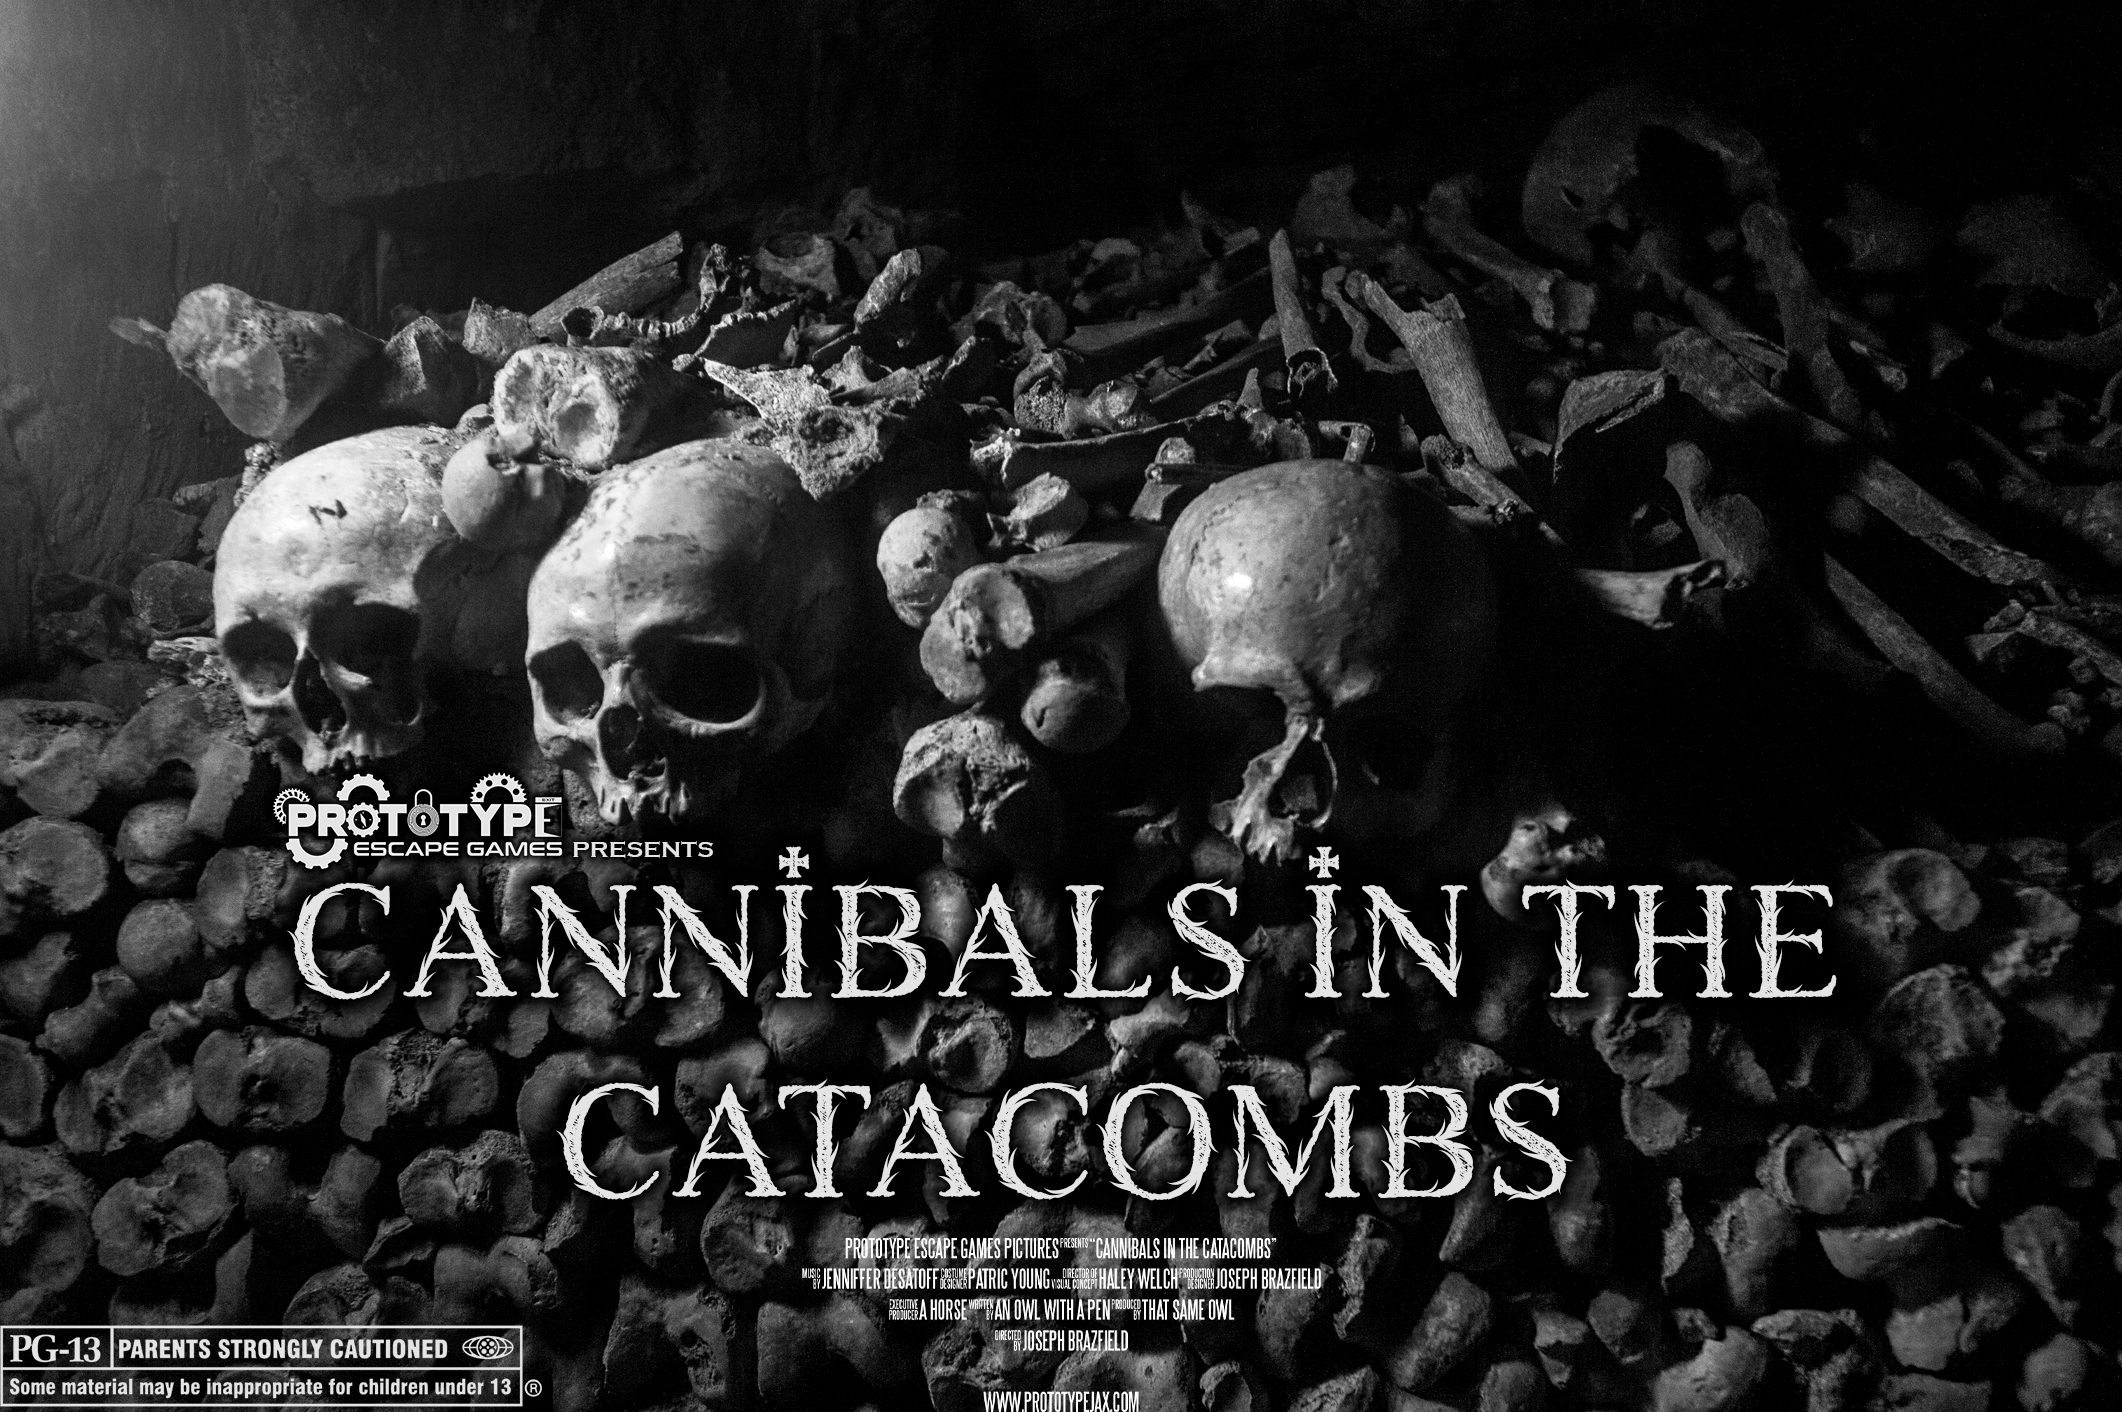 Game Poster for Cannibals In The Catacombs Prototype Escape Games Jackonville, Florida